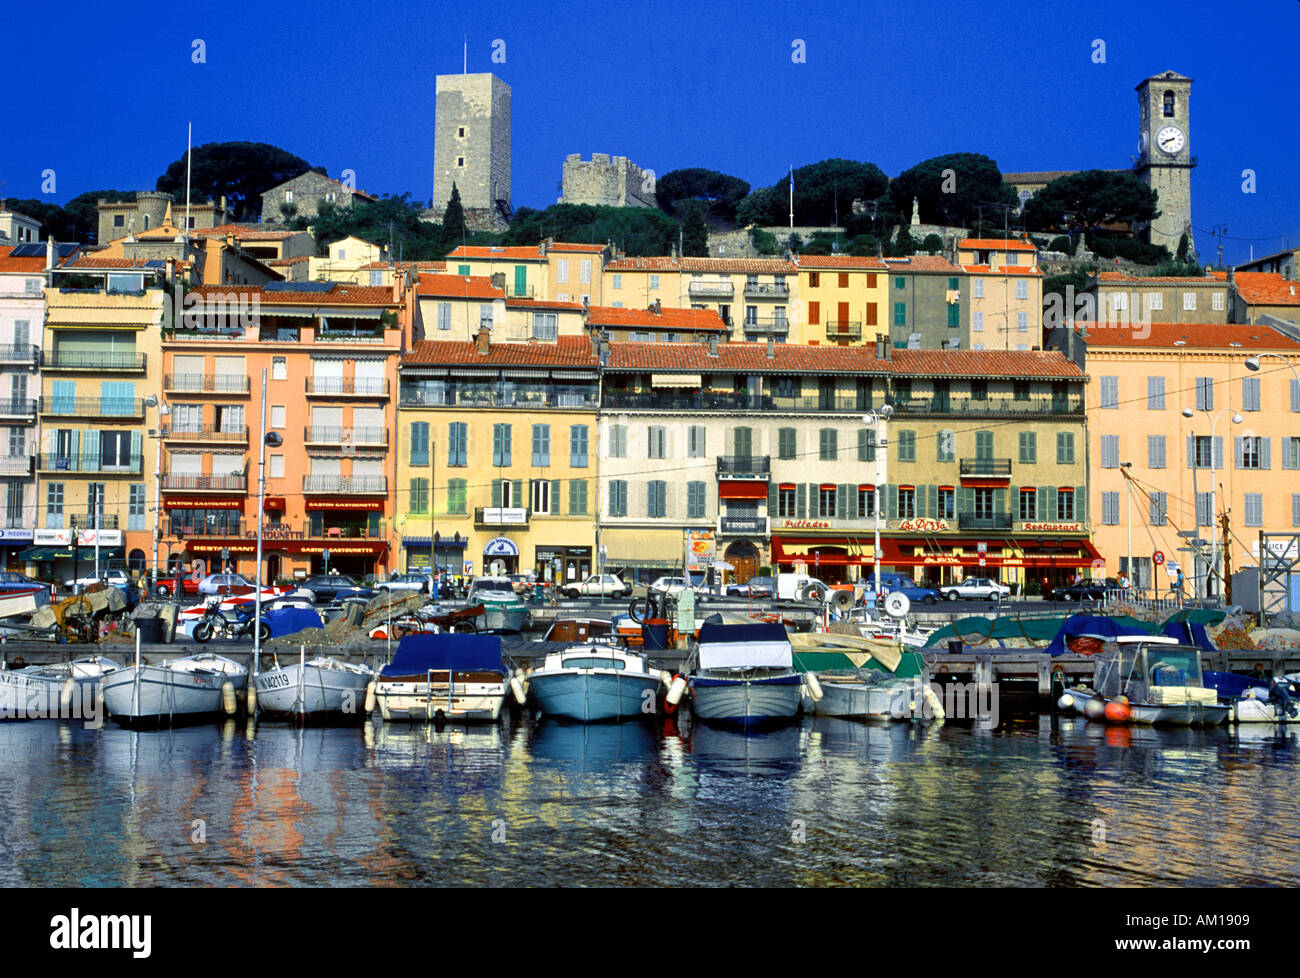 LE SUQUET CANNES FRENCH RIVIERA FRANCE Stock Photo: 1317128 - Alamy